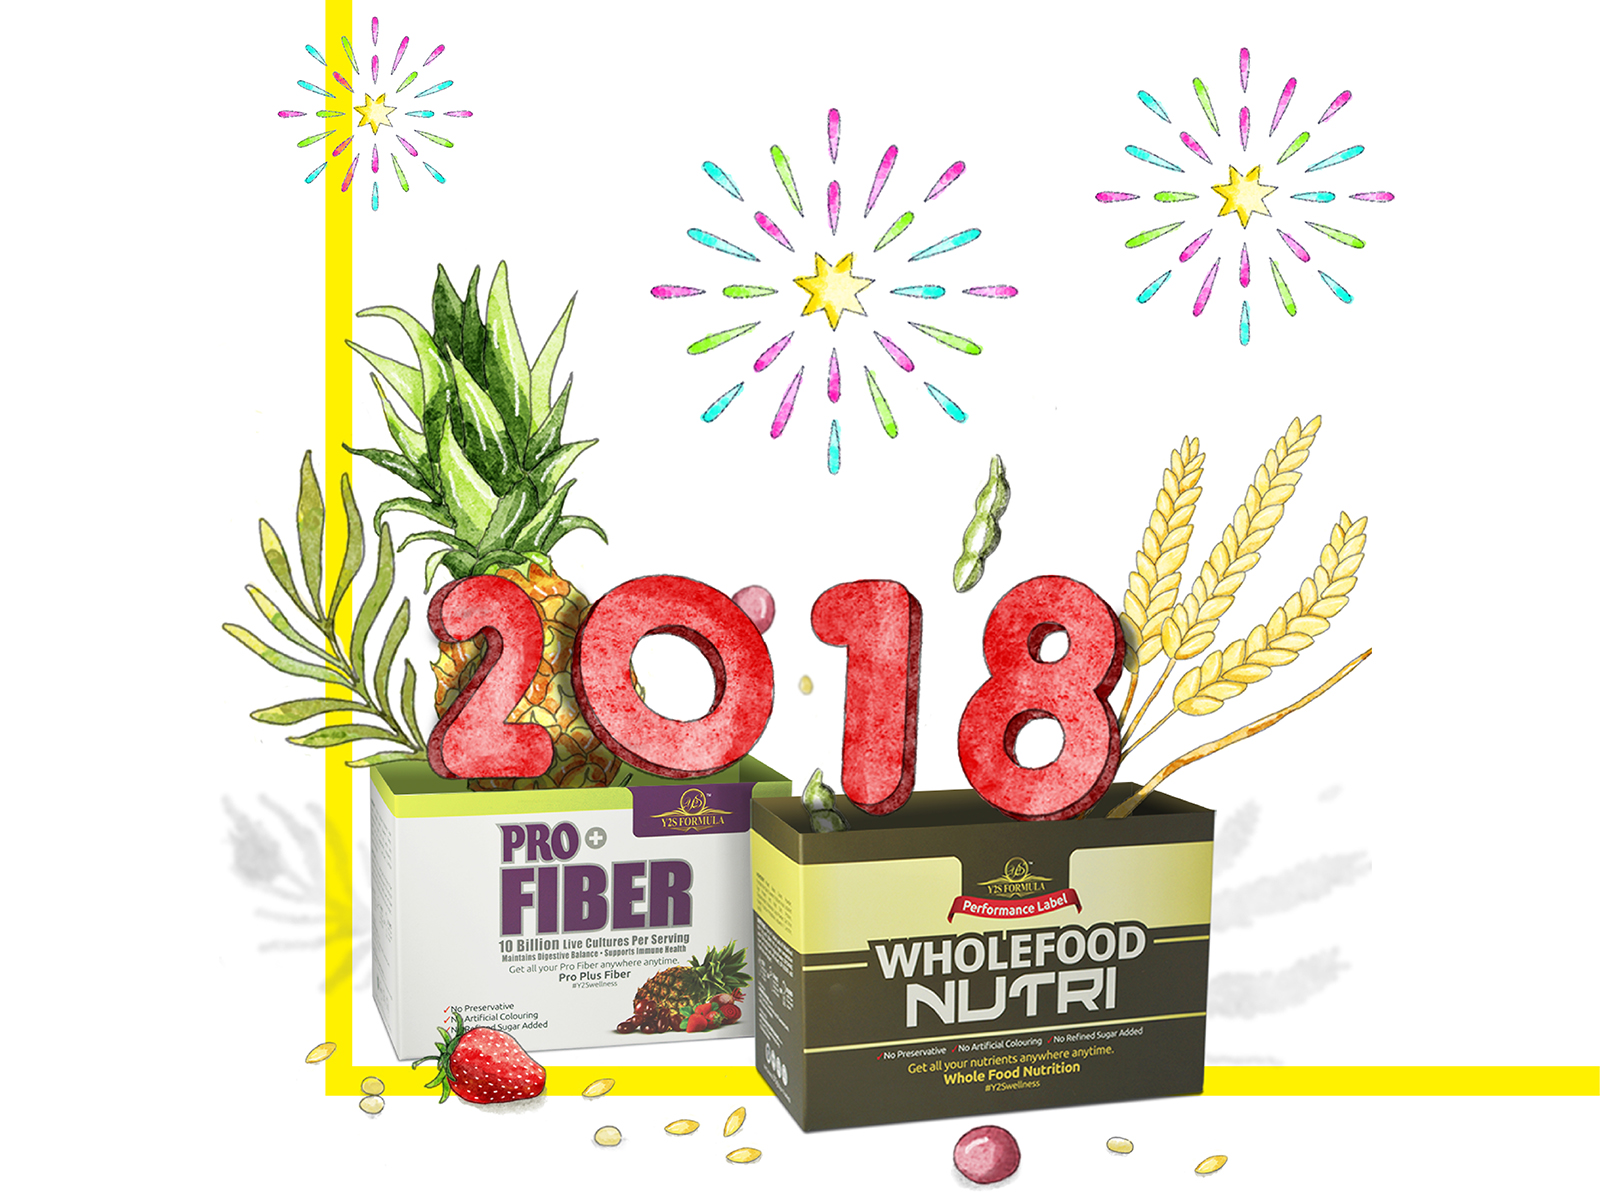 Y2S Wellness social media management post illustration of new year celebration with real product images accompanied by fruits, wheats and fireworks illustration.